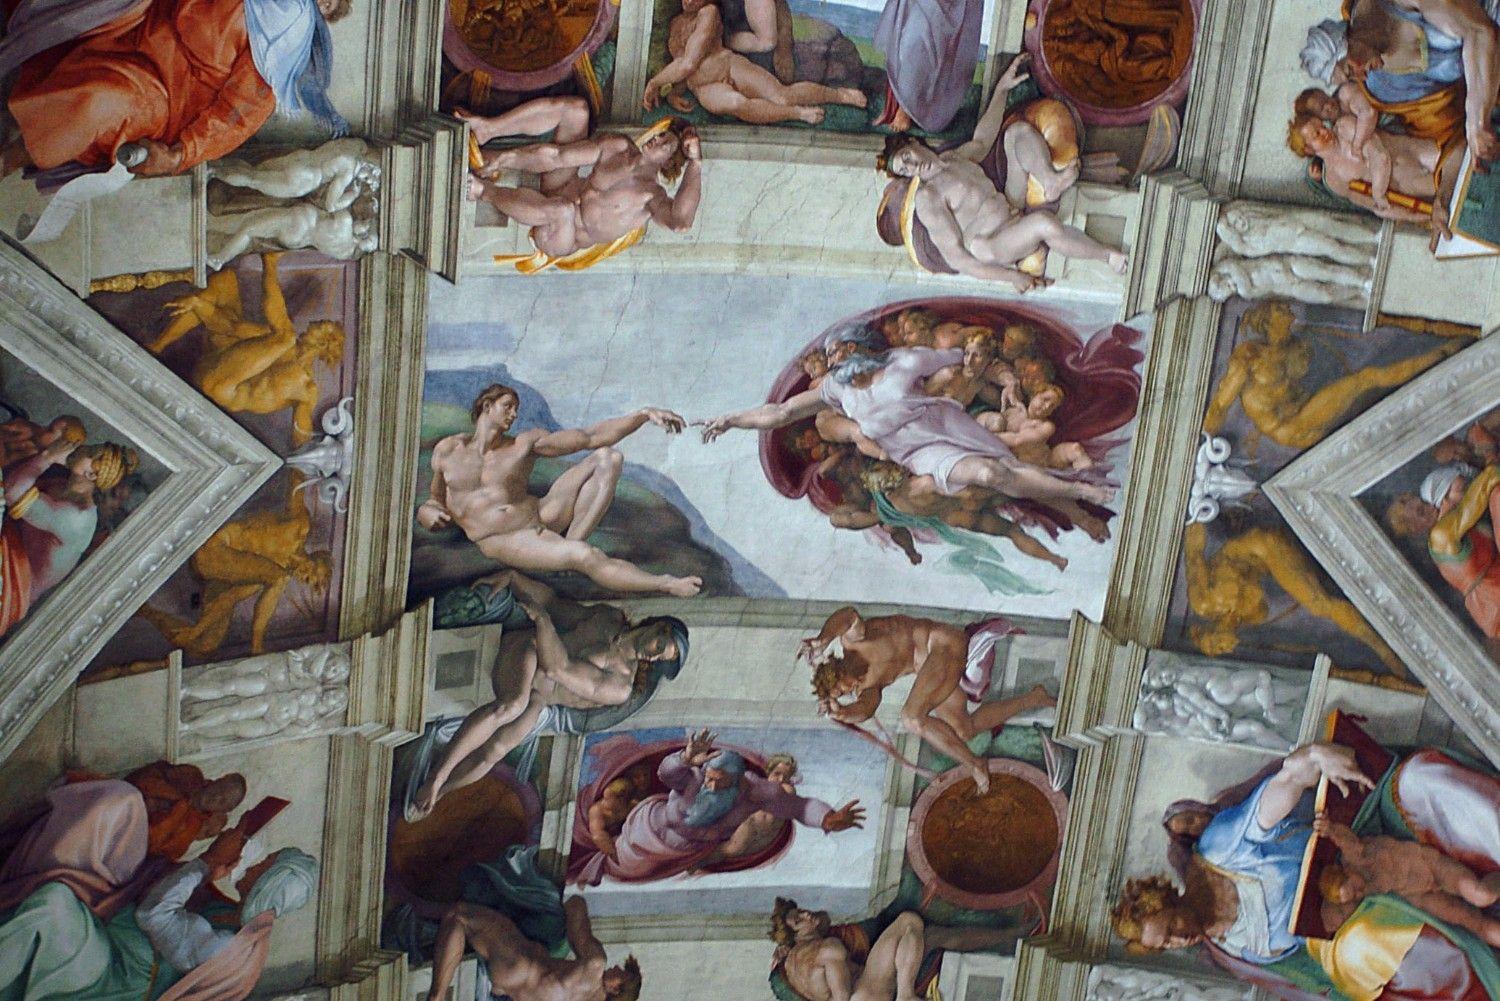 The Vatican will present a show about the Sistine Chapel